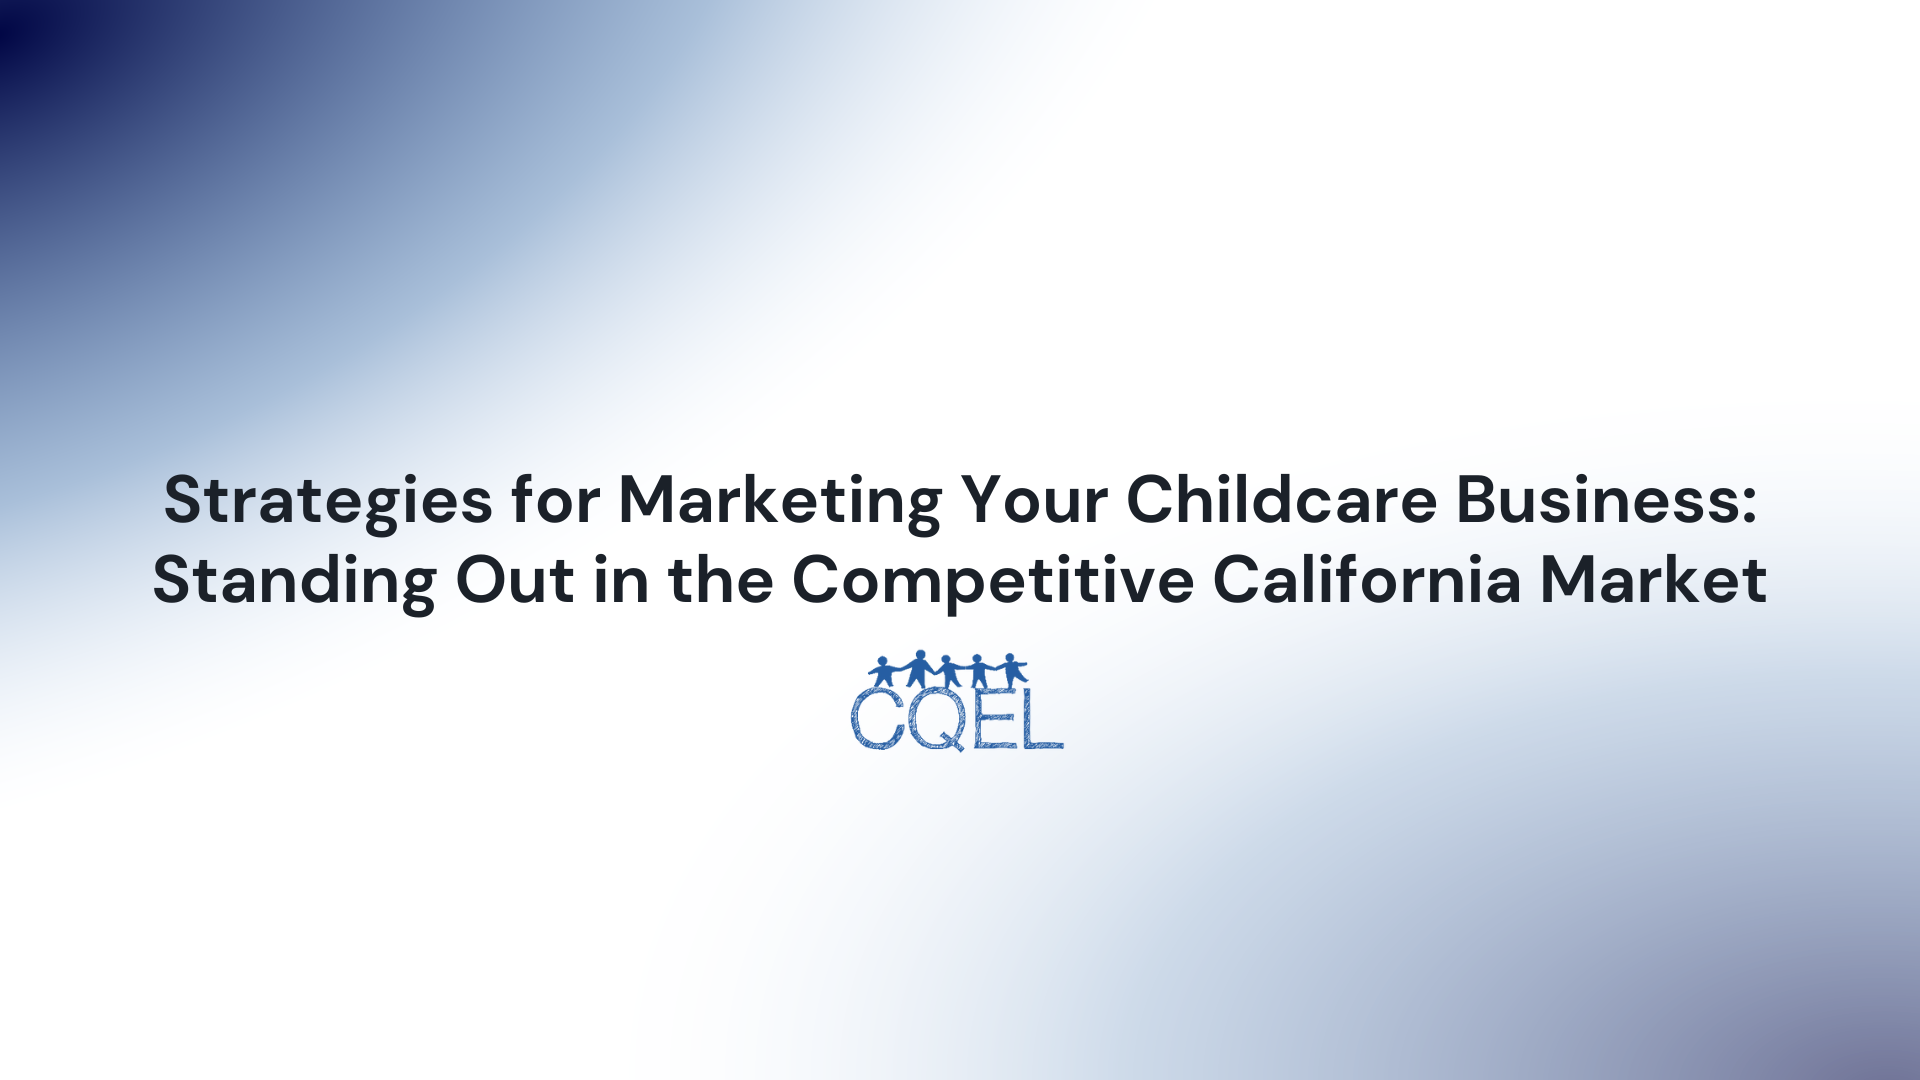 Strategies for Marketing Your Childcare Business: Standing Out in the Competitive California Market